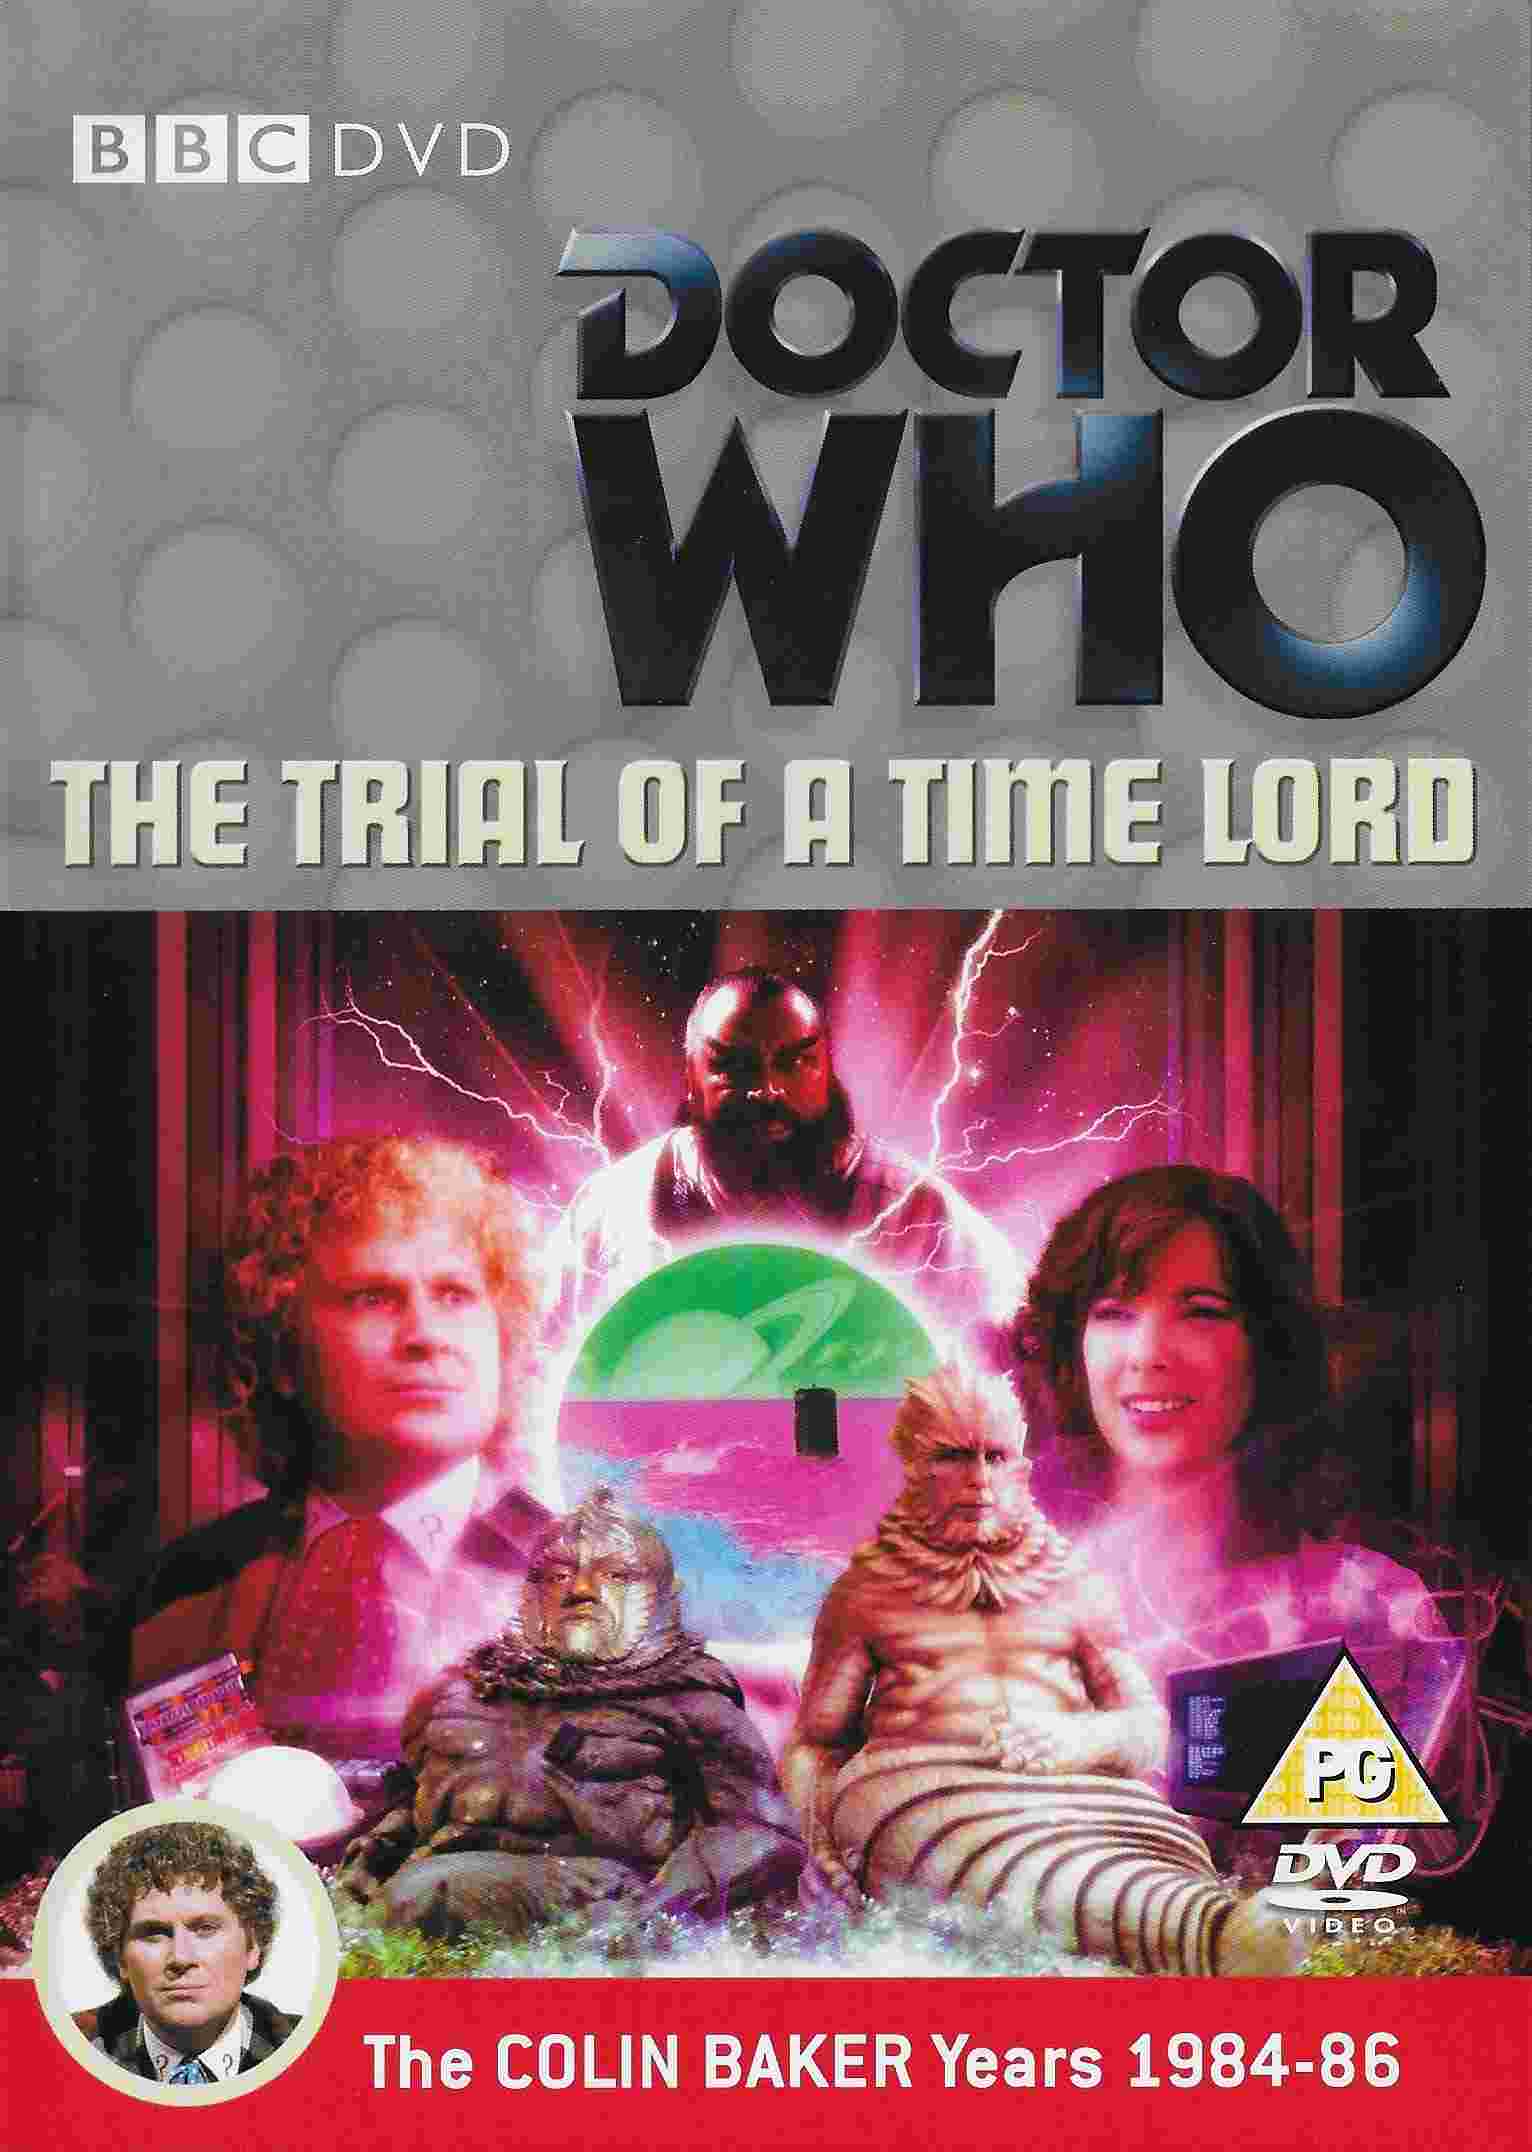 Picture of BBCDVD 2422B Doctor Who - The trial of a Time Lord - Parts 5-8 - Mindwarp by artist Philip Martin from the BBC dvds - Records and Tapes library